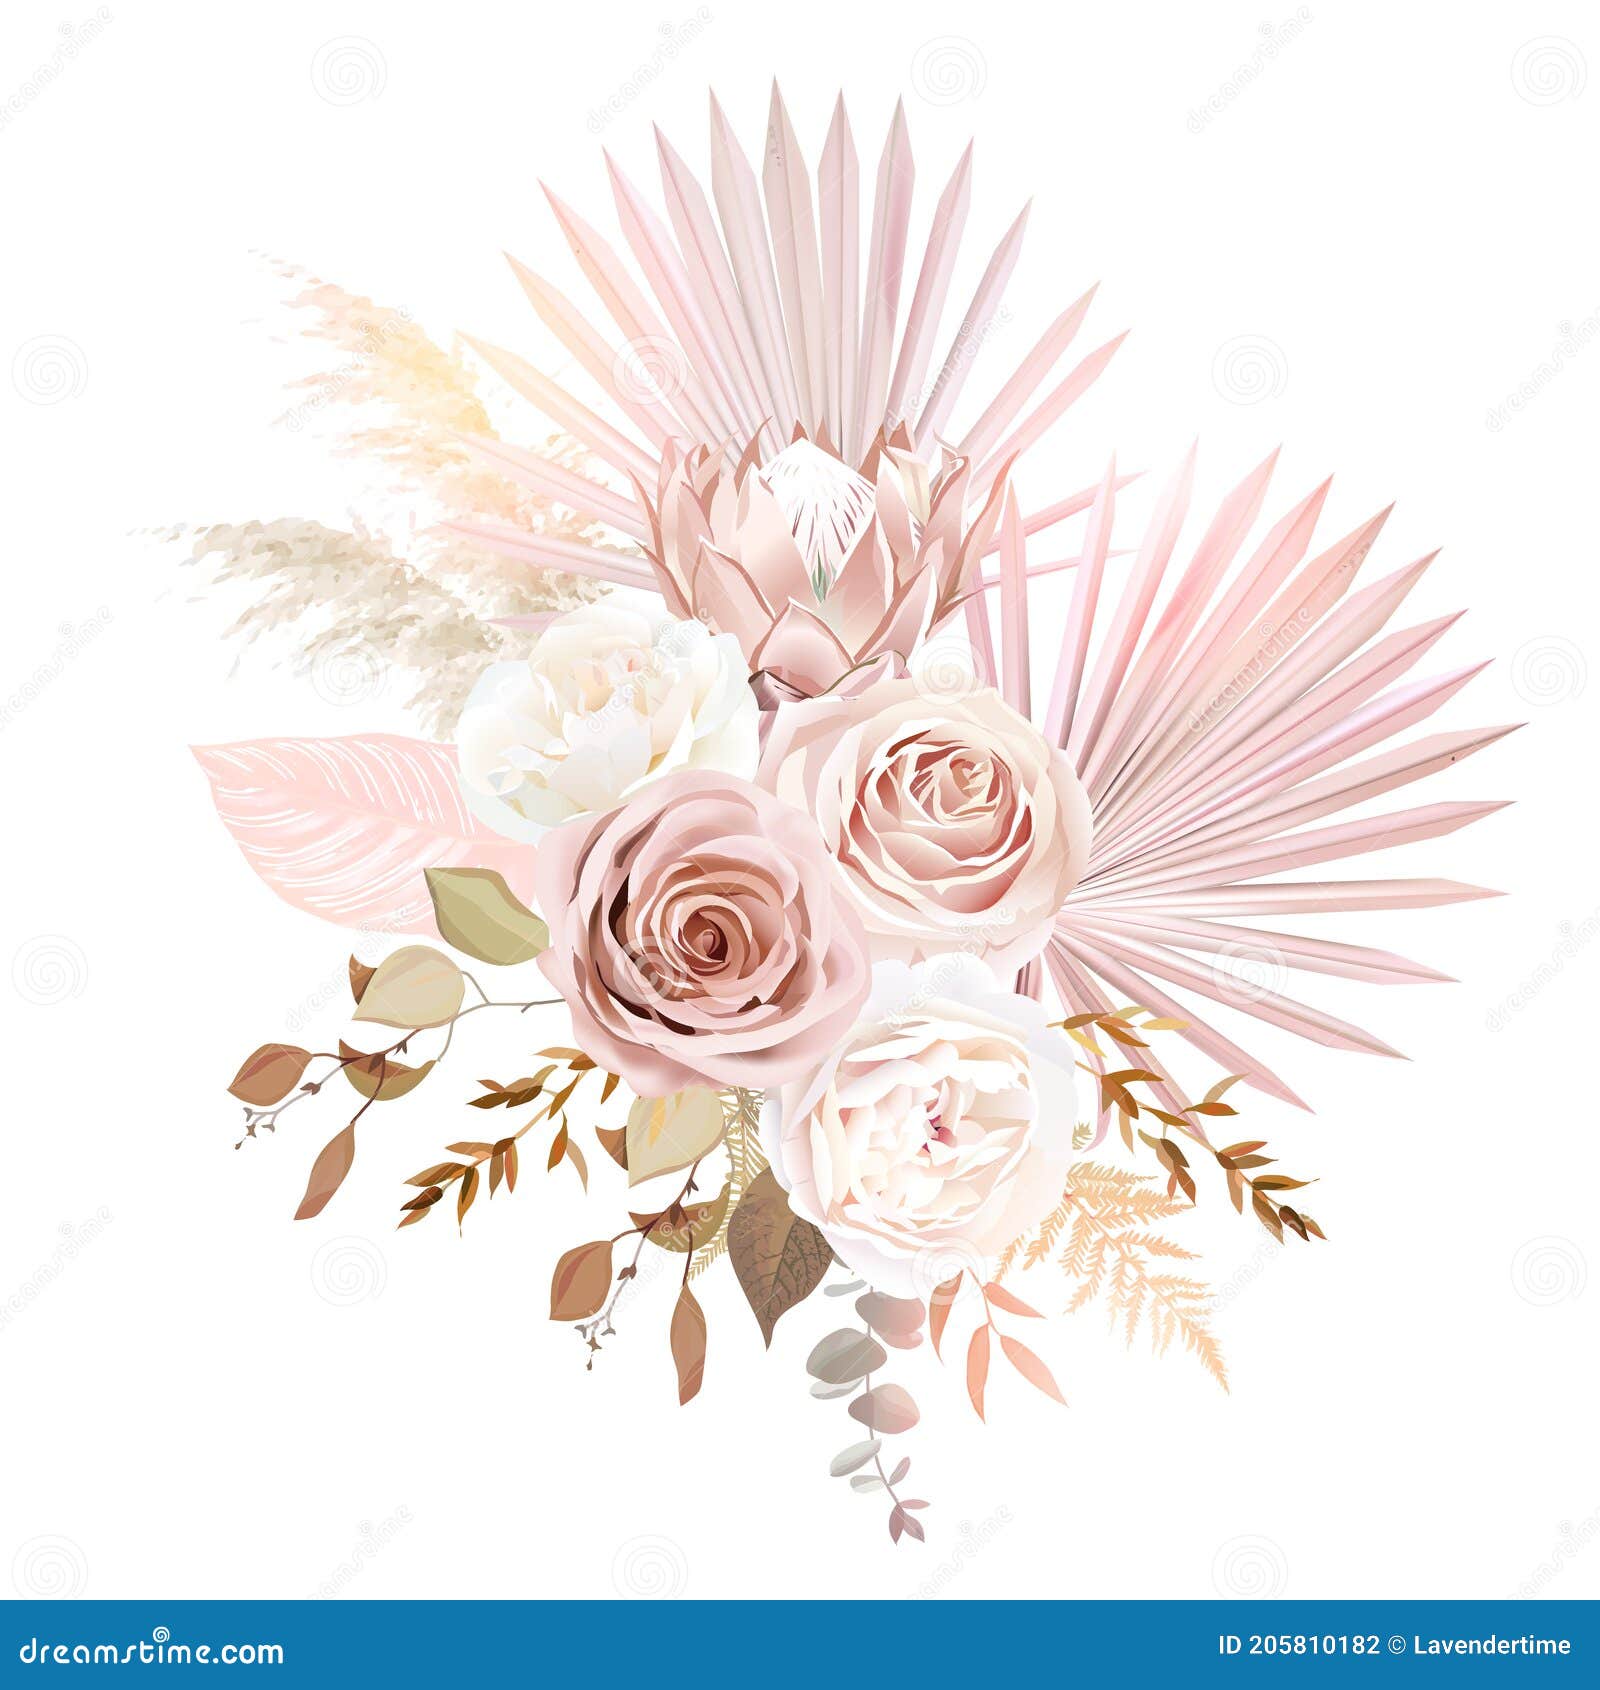 trendy dried palm leaves, blush pink rose, pale protea, white ranunculus